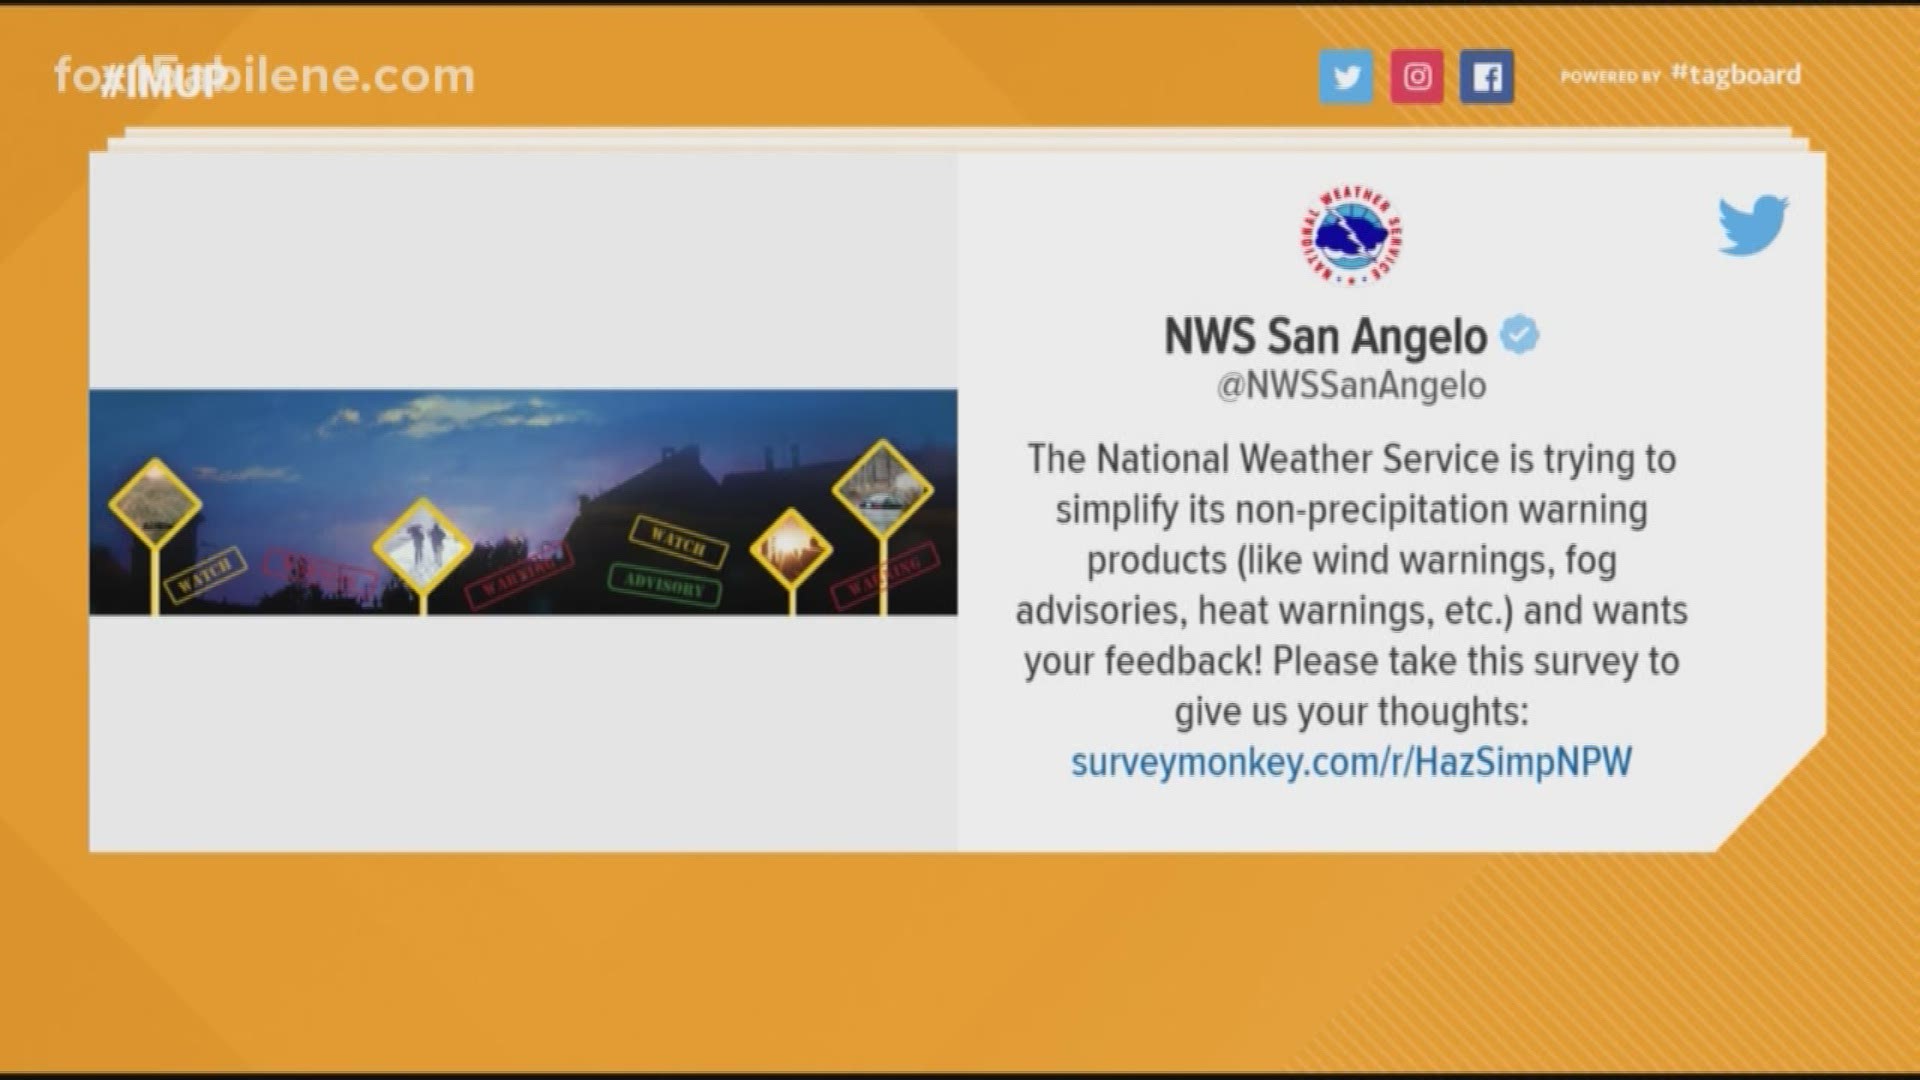 The National Weather Service is looking to simplify their more than 120 watches, warning and advisories, and they want to hear from you. 